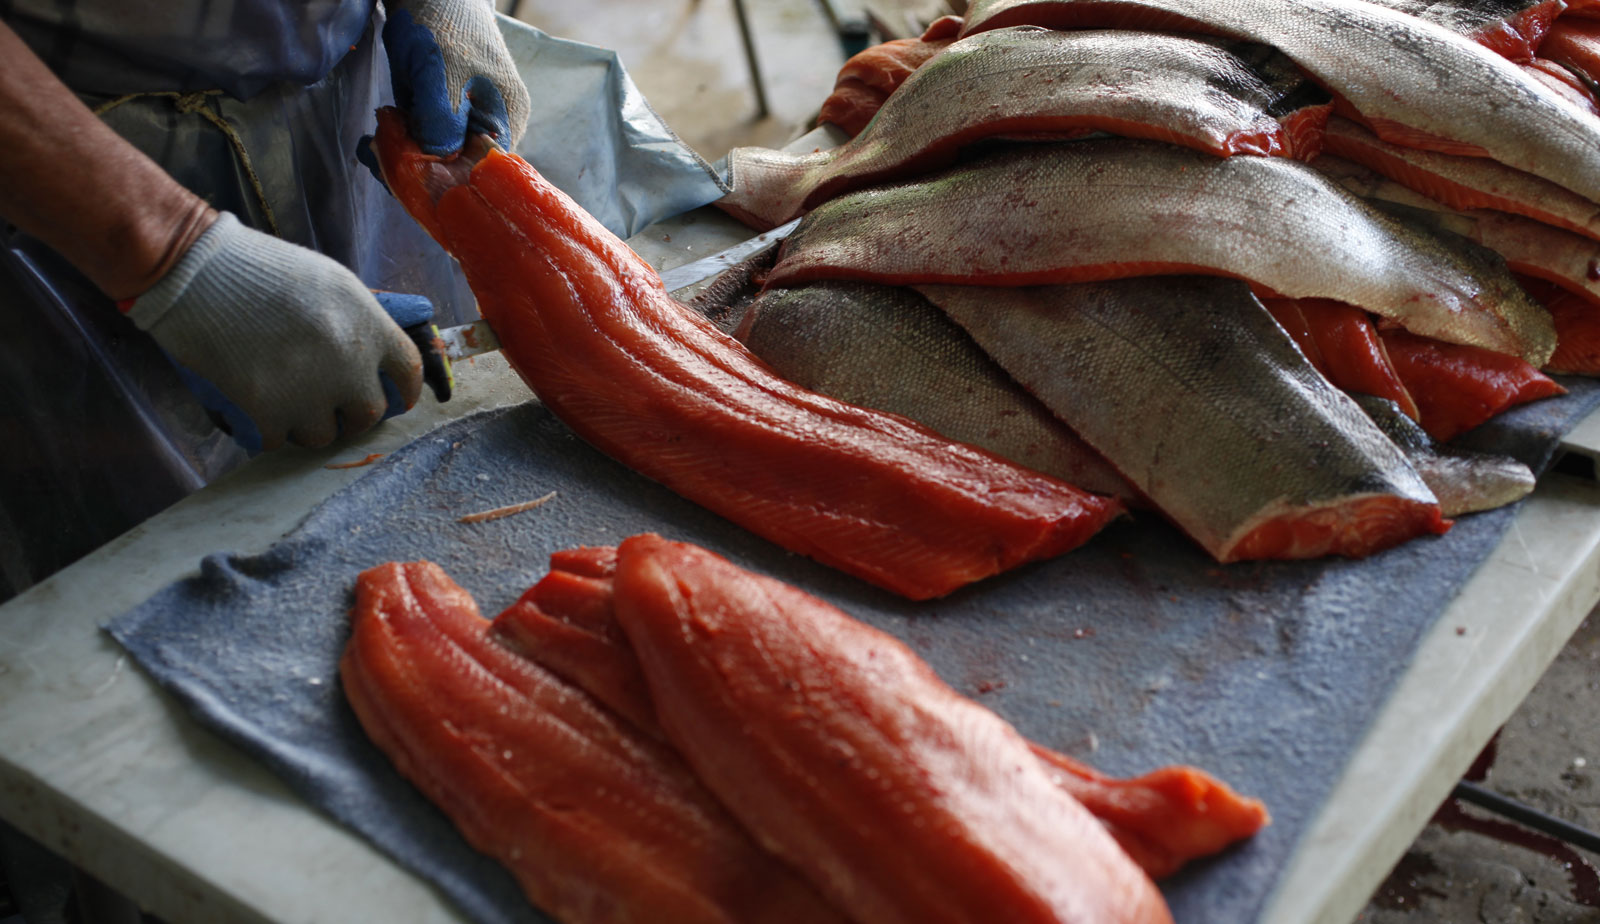 A man is filleting fresh salmon, he wears gloves and is holding a knife is one hand, and a piece of fish in the other. On the right, there is a large pile of salmon skins, and on the left is a pile of fillets.